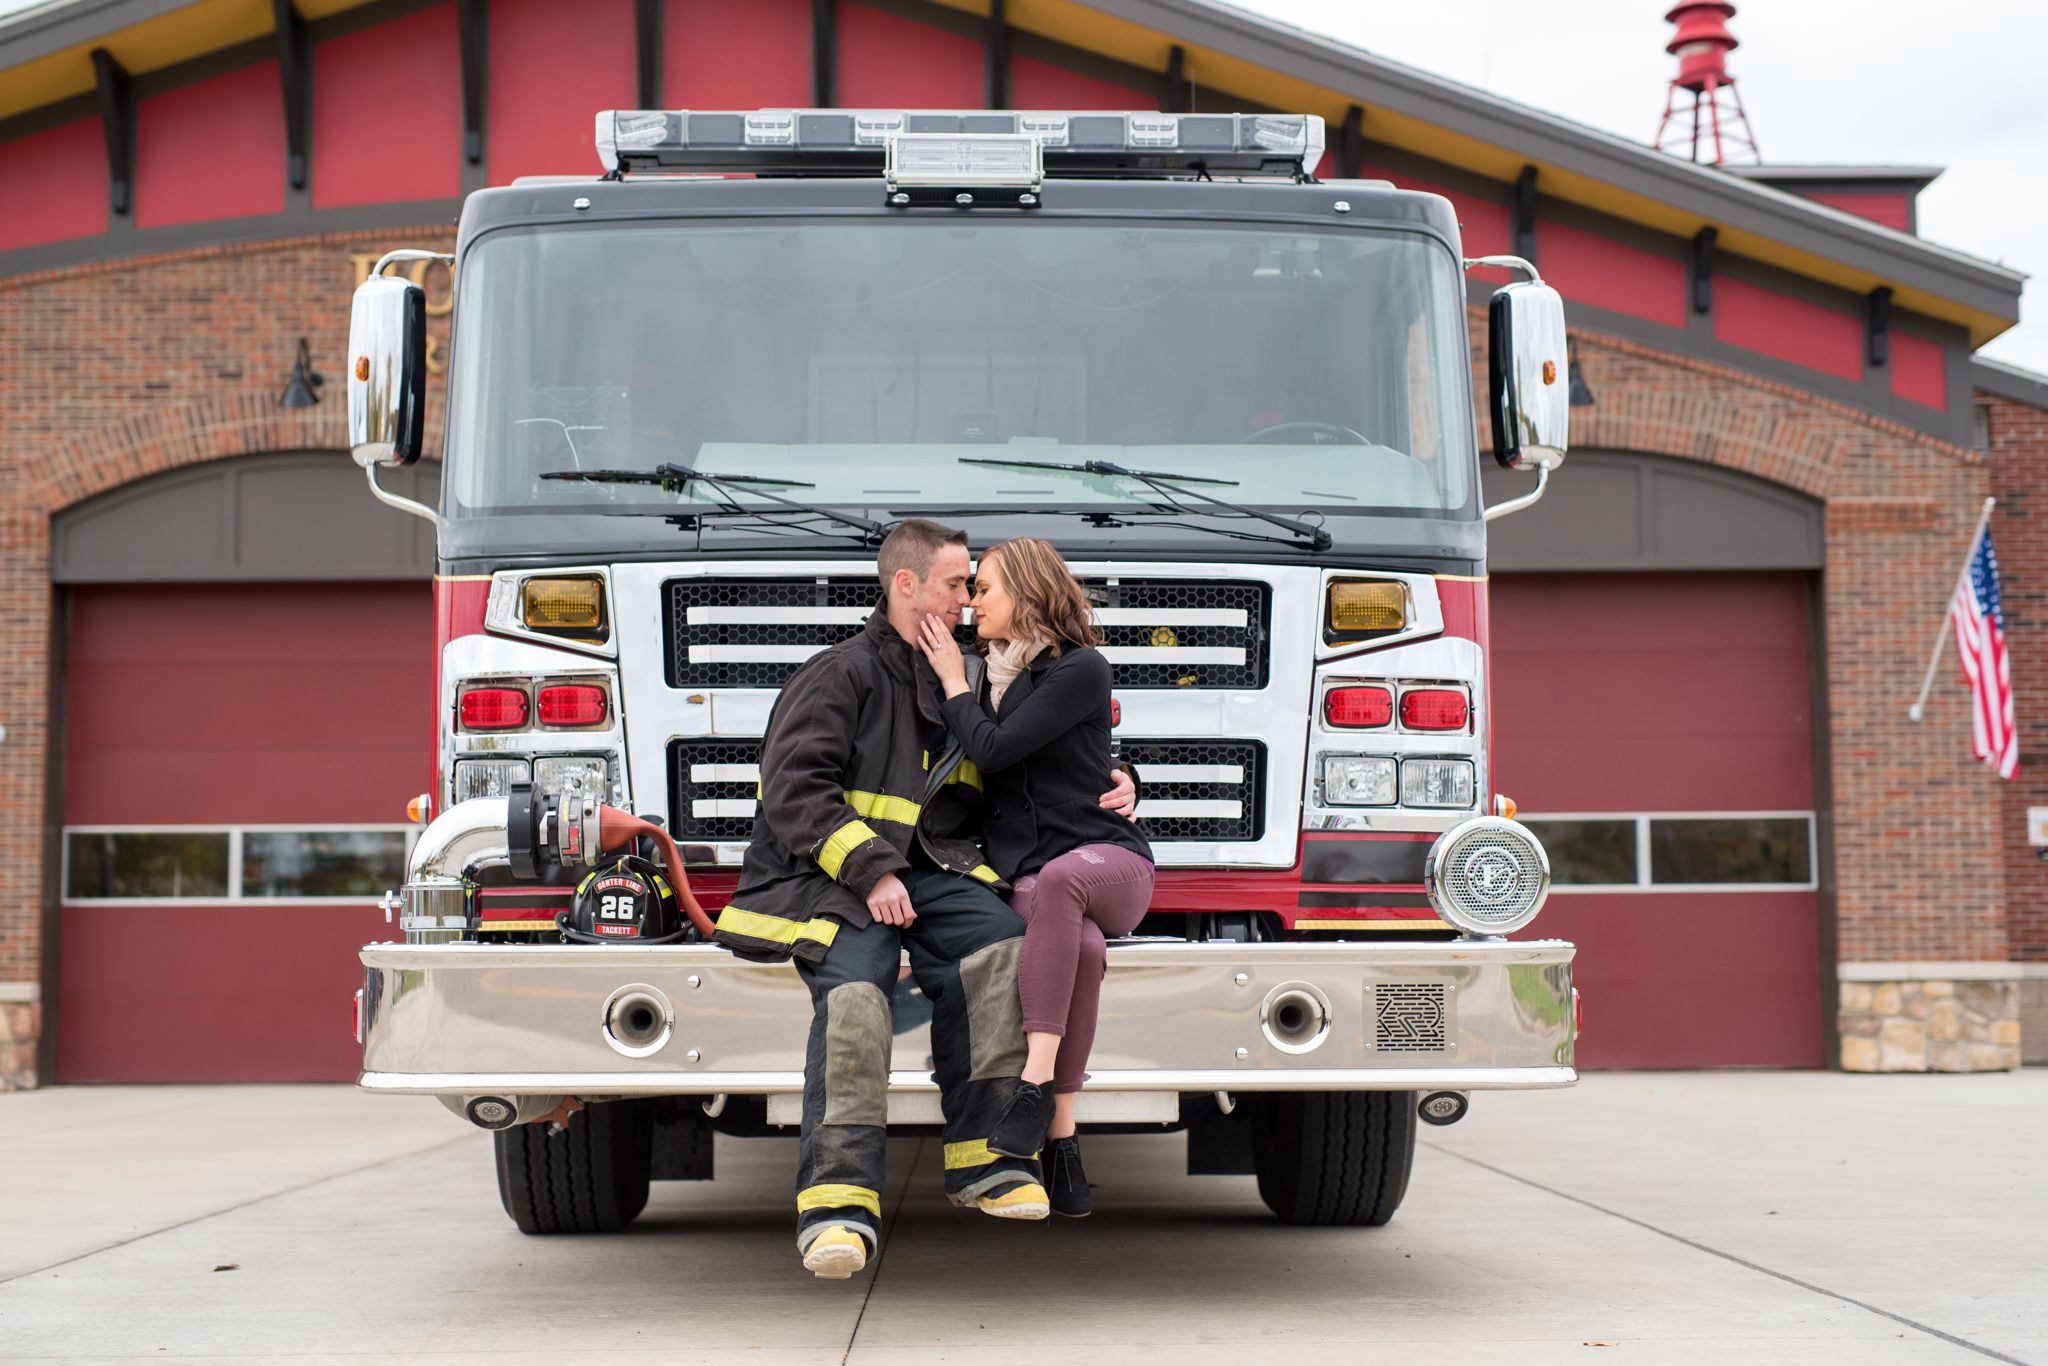 Rochester Hills Engagement Photography